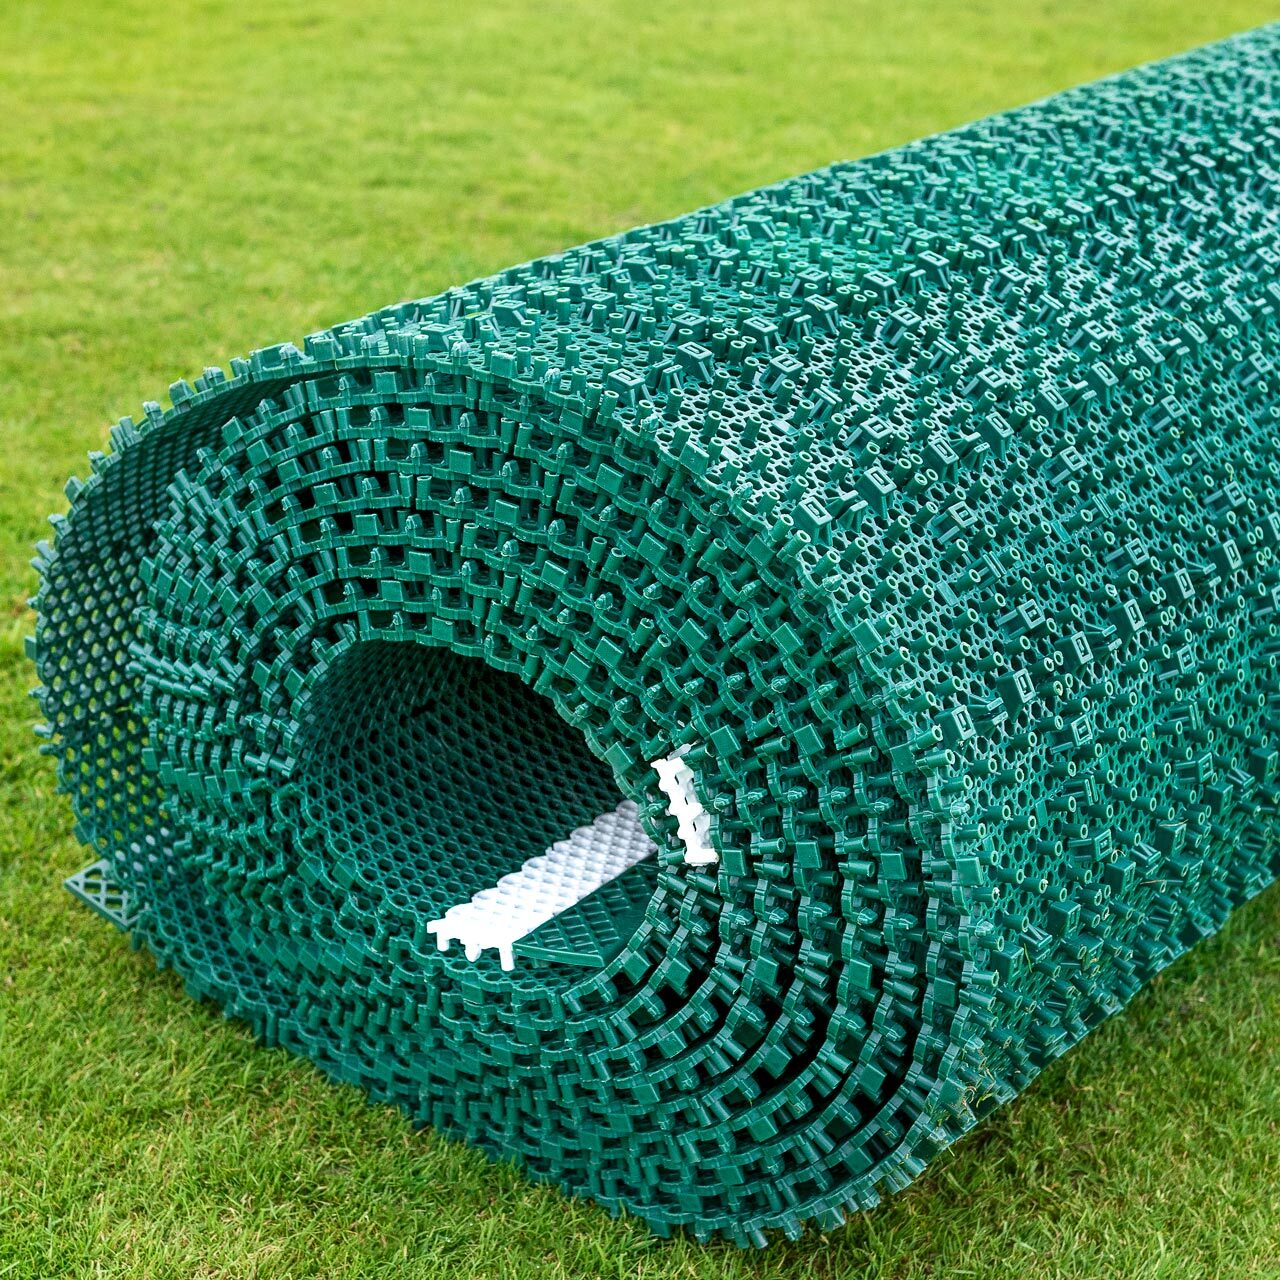 FORTRESS Instant Cricket Pitch Matting - 6X Lengths | Ideal for Backyard  Practice & Matches | Easy Set Up - No Installation | Durable Indoor/Outdoor